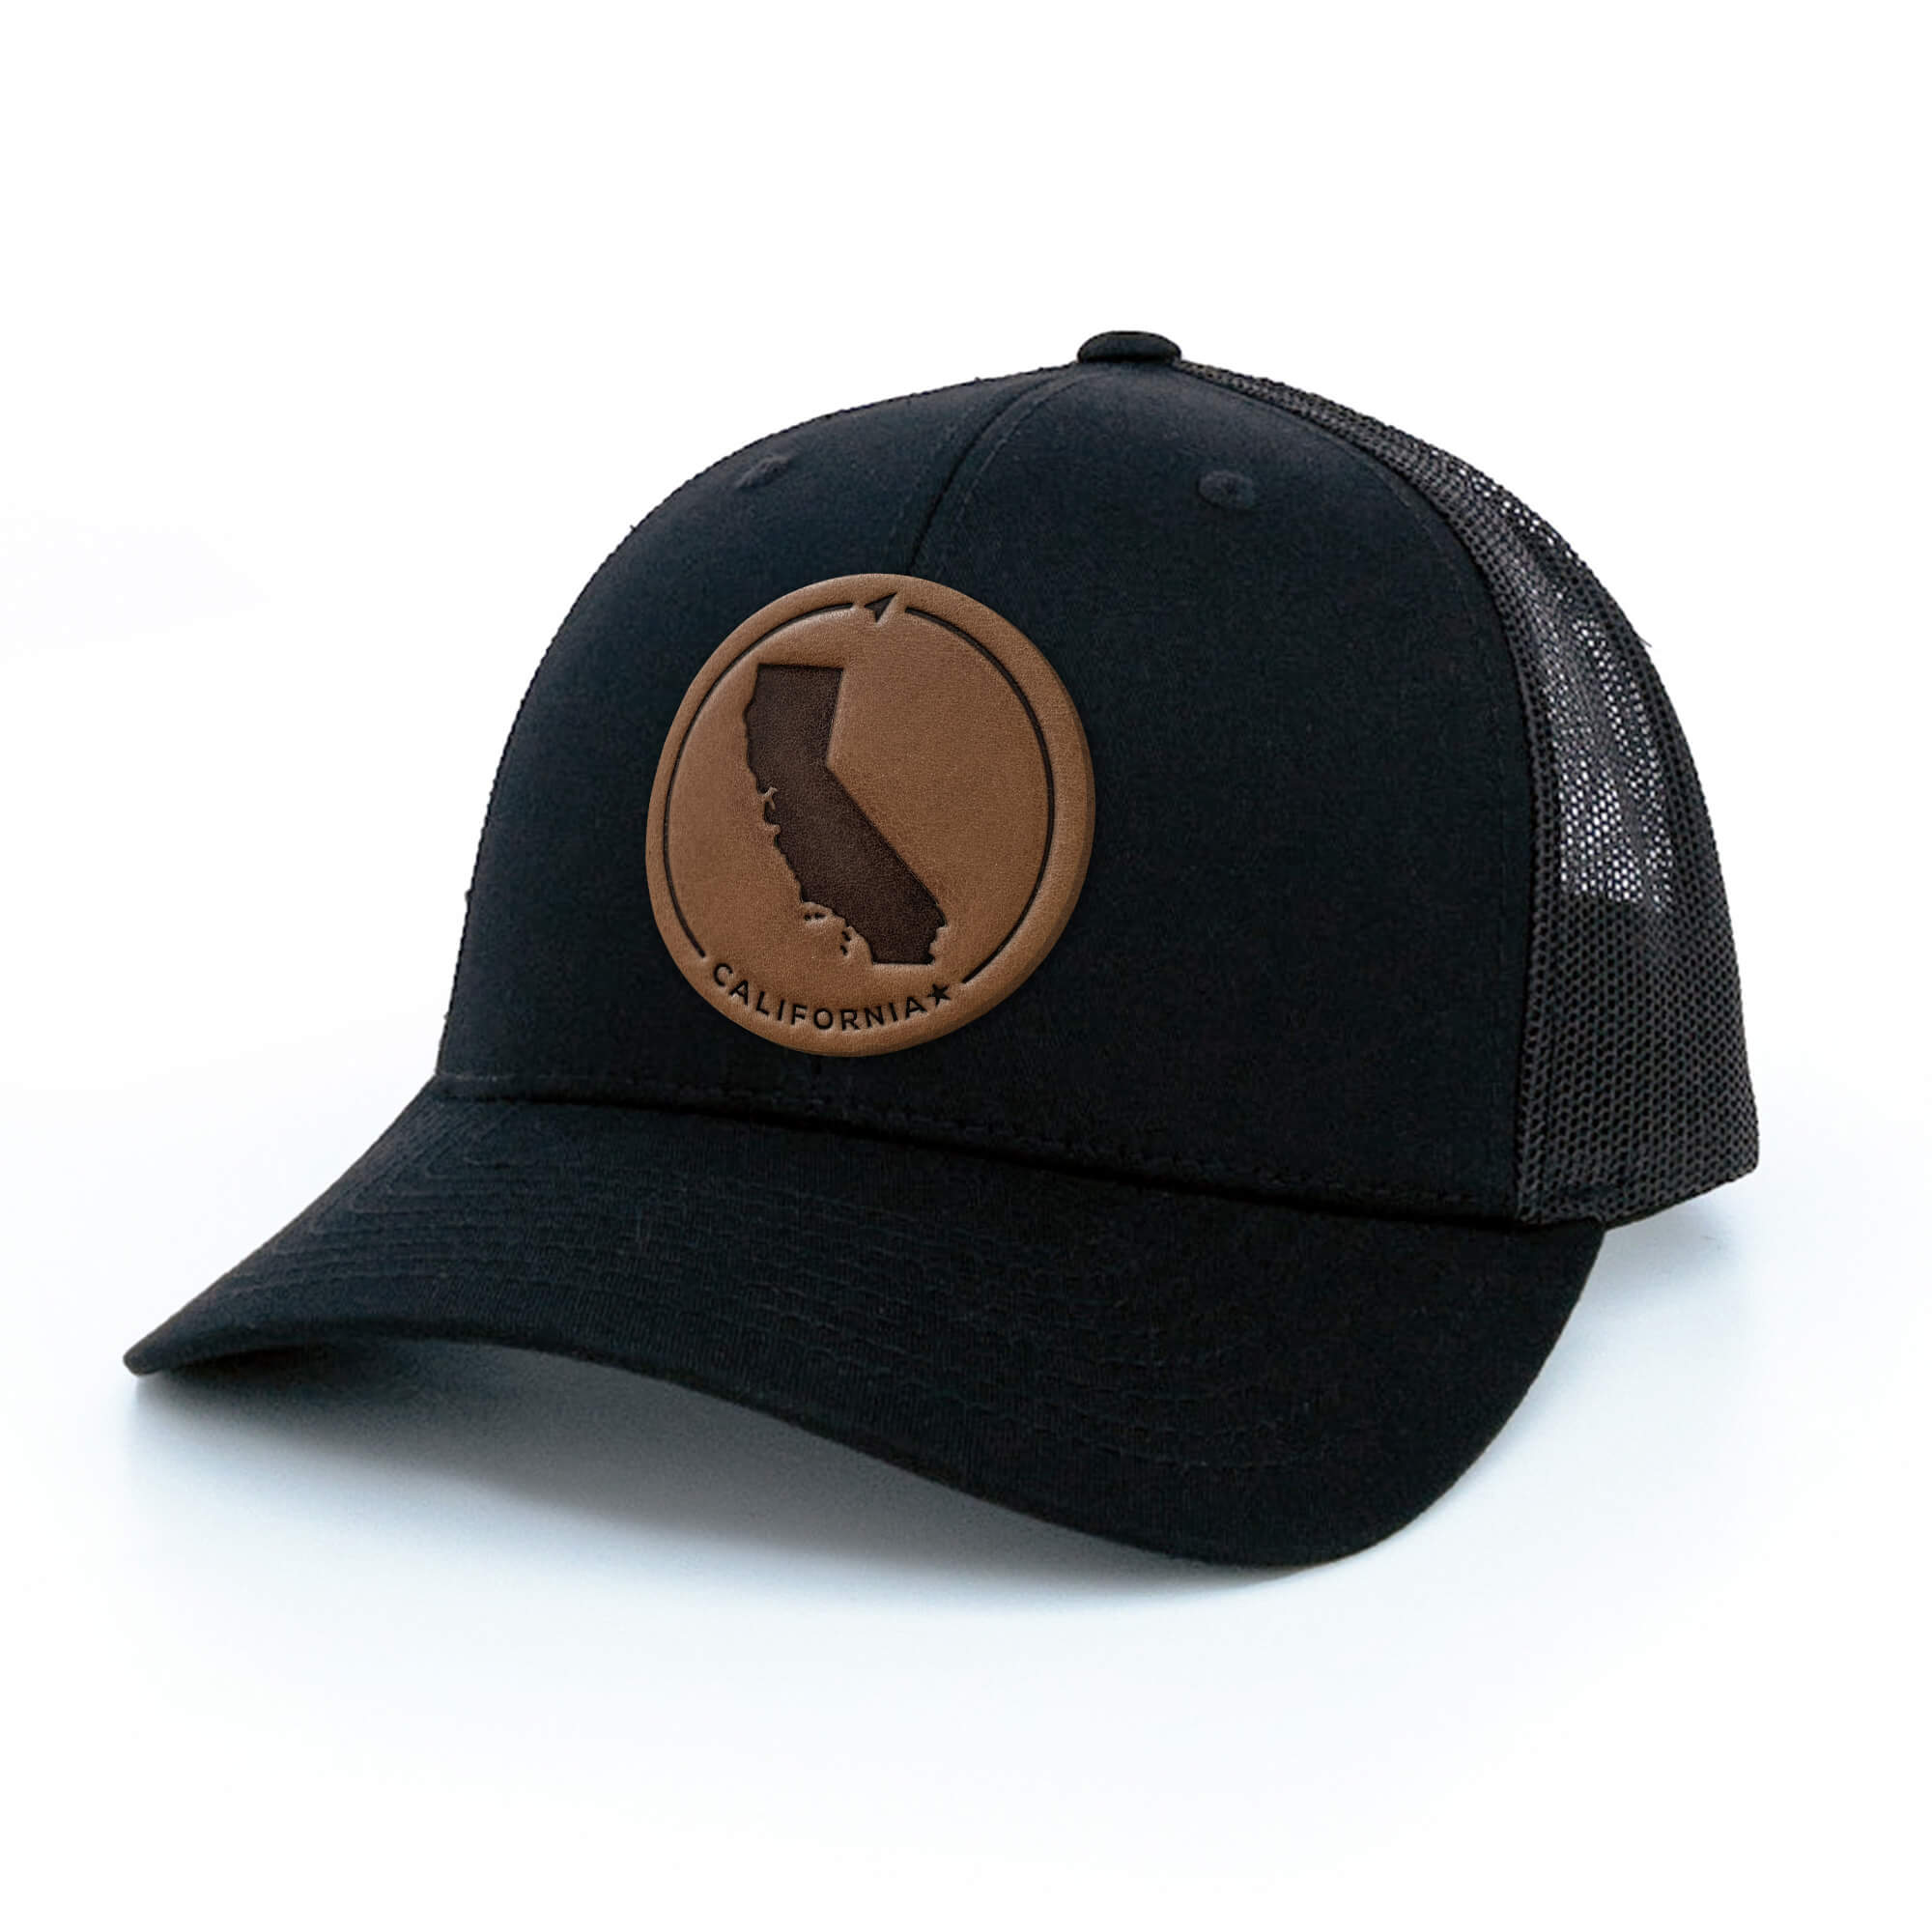 Black trucker hat with full-grain leather patch of California | BLACK-003-011, CHARC-003-011, NAVY-003-011, HGREY-003-011, MOSS-003-011, BROWN-003-011